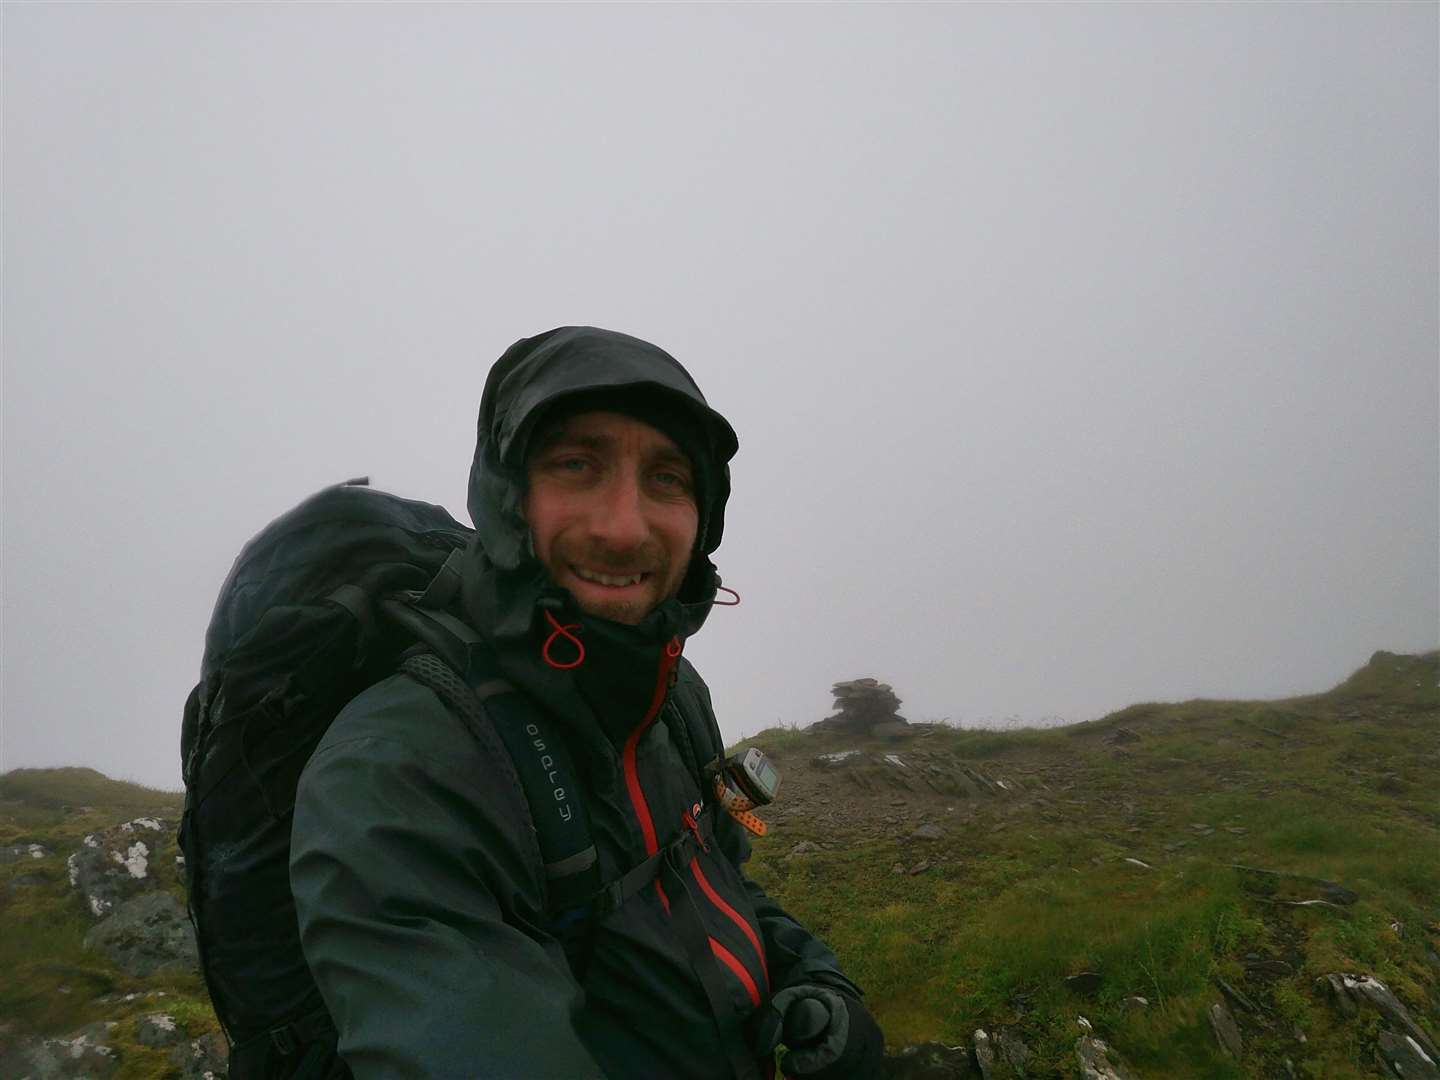 John at the summit of Sgurr Choinnich after the windy ascent of the west ridge.